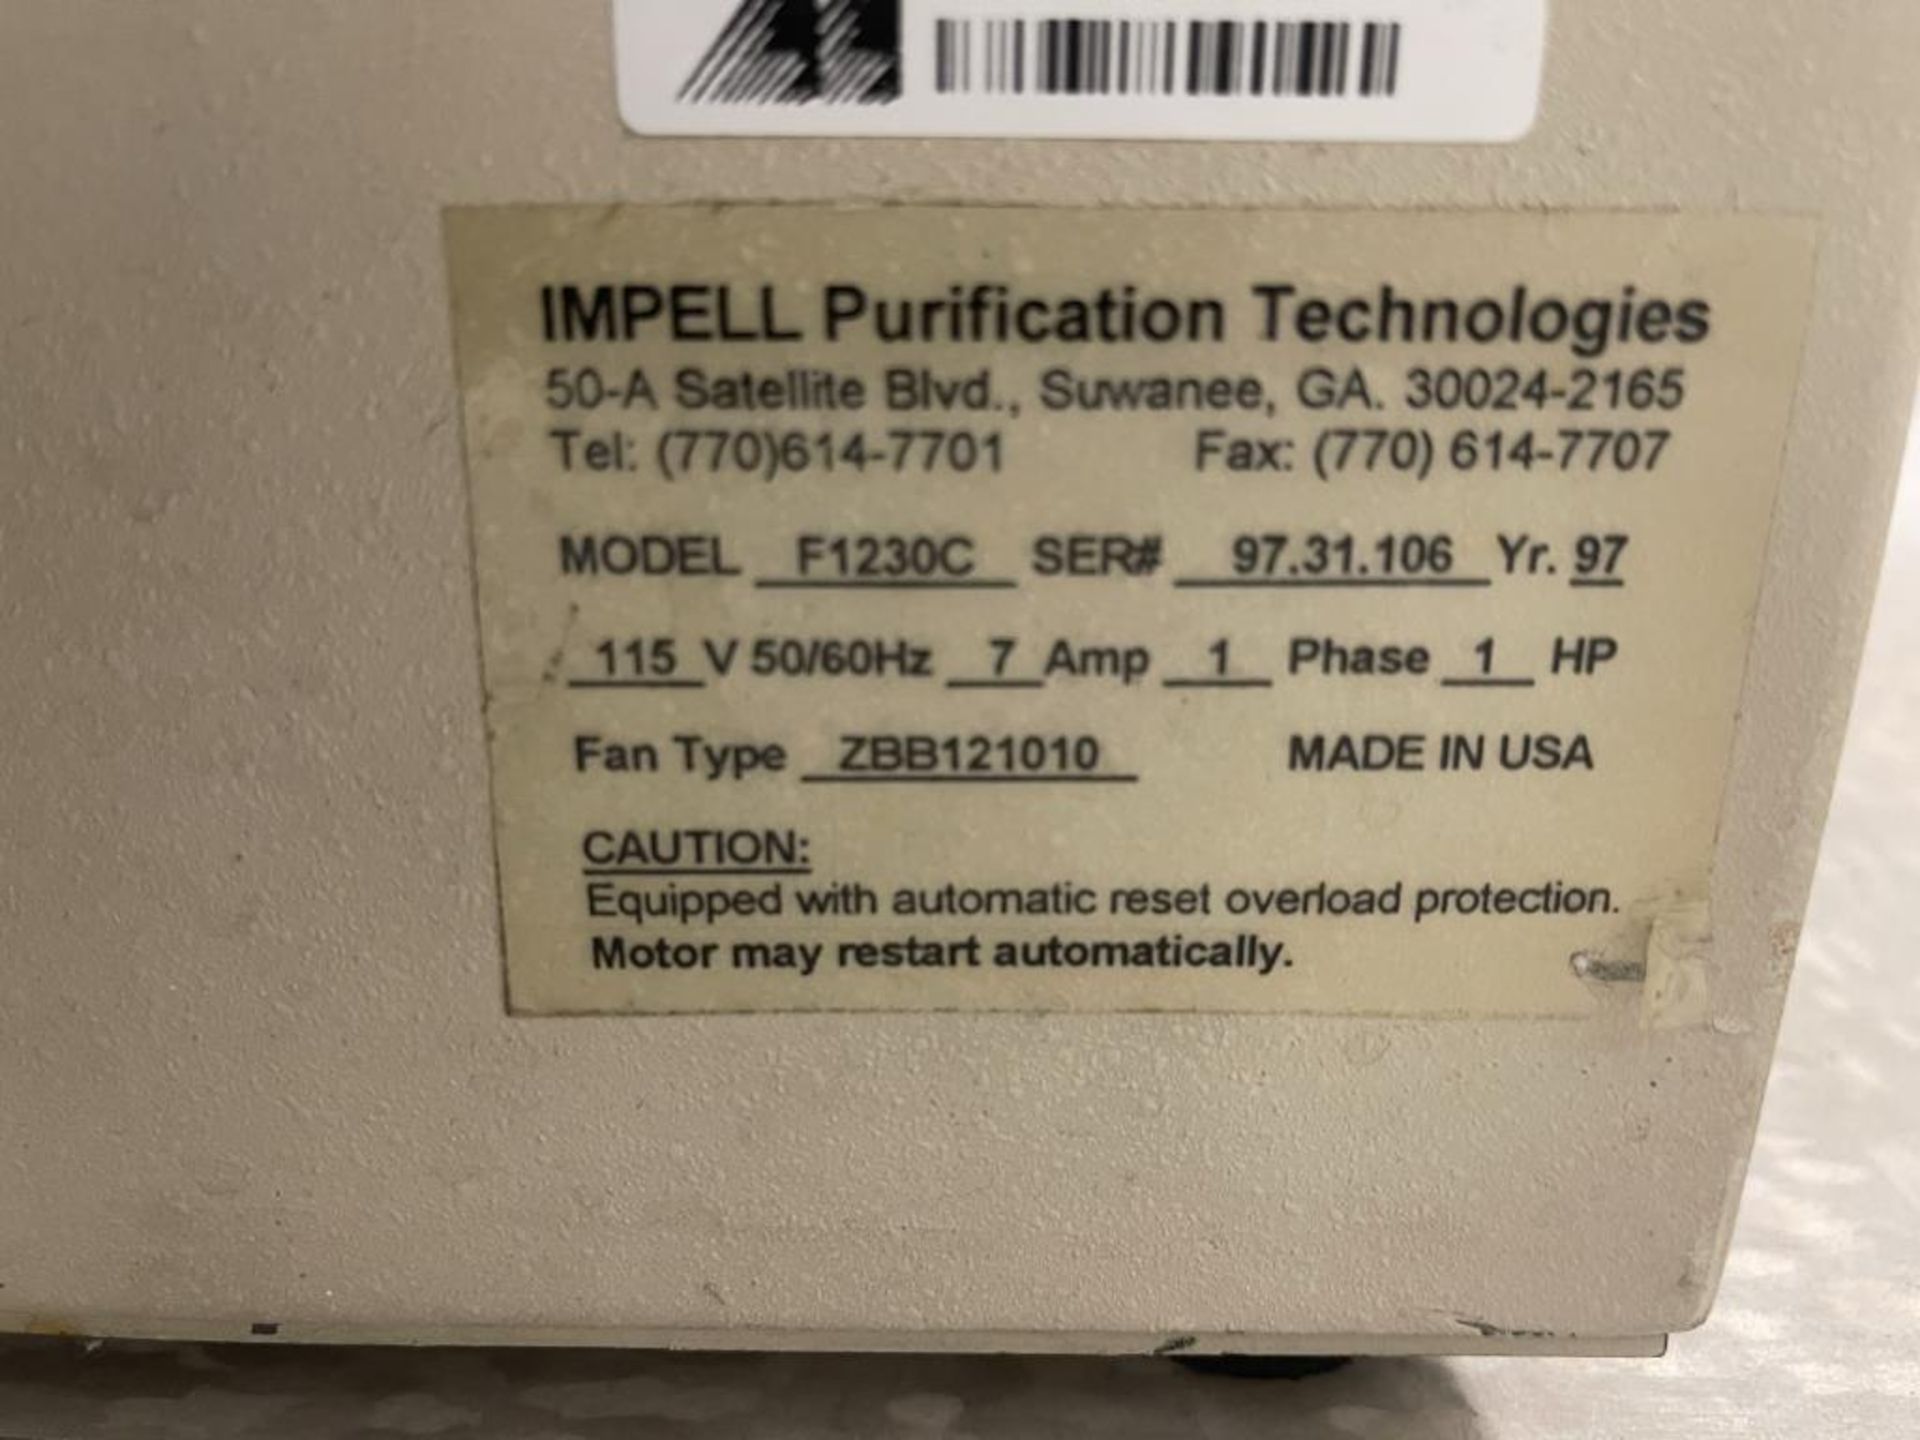 Impell Purification Technologies Air Purification System - Image 2 of 2